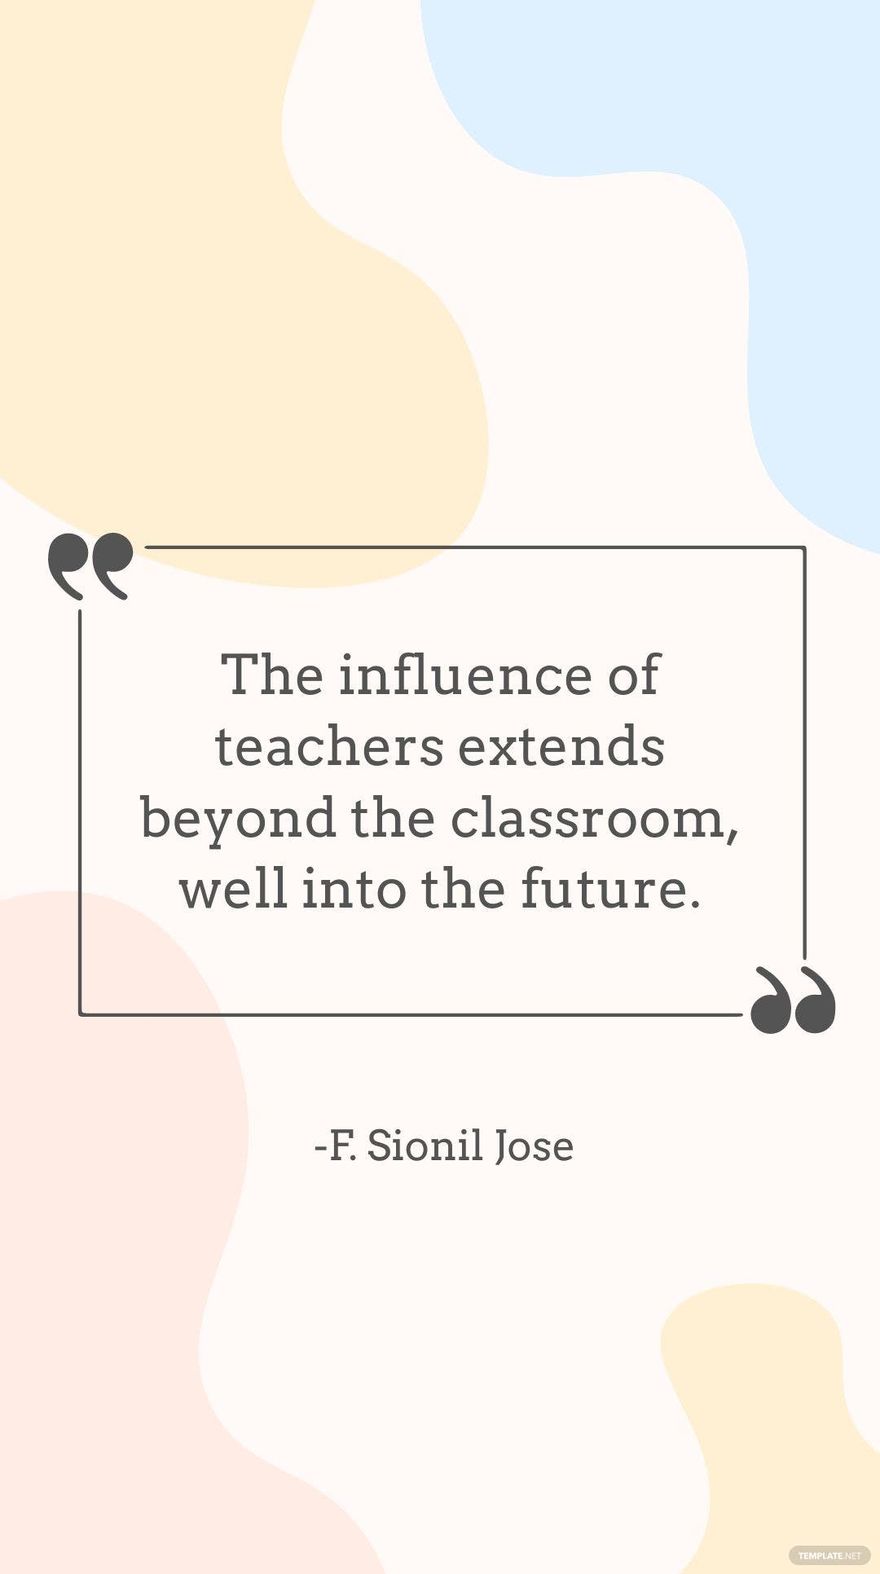 Free F. Sionil Jose - The influence of teachers extends beyond the classroom, well into the future.